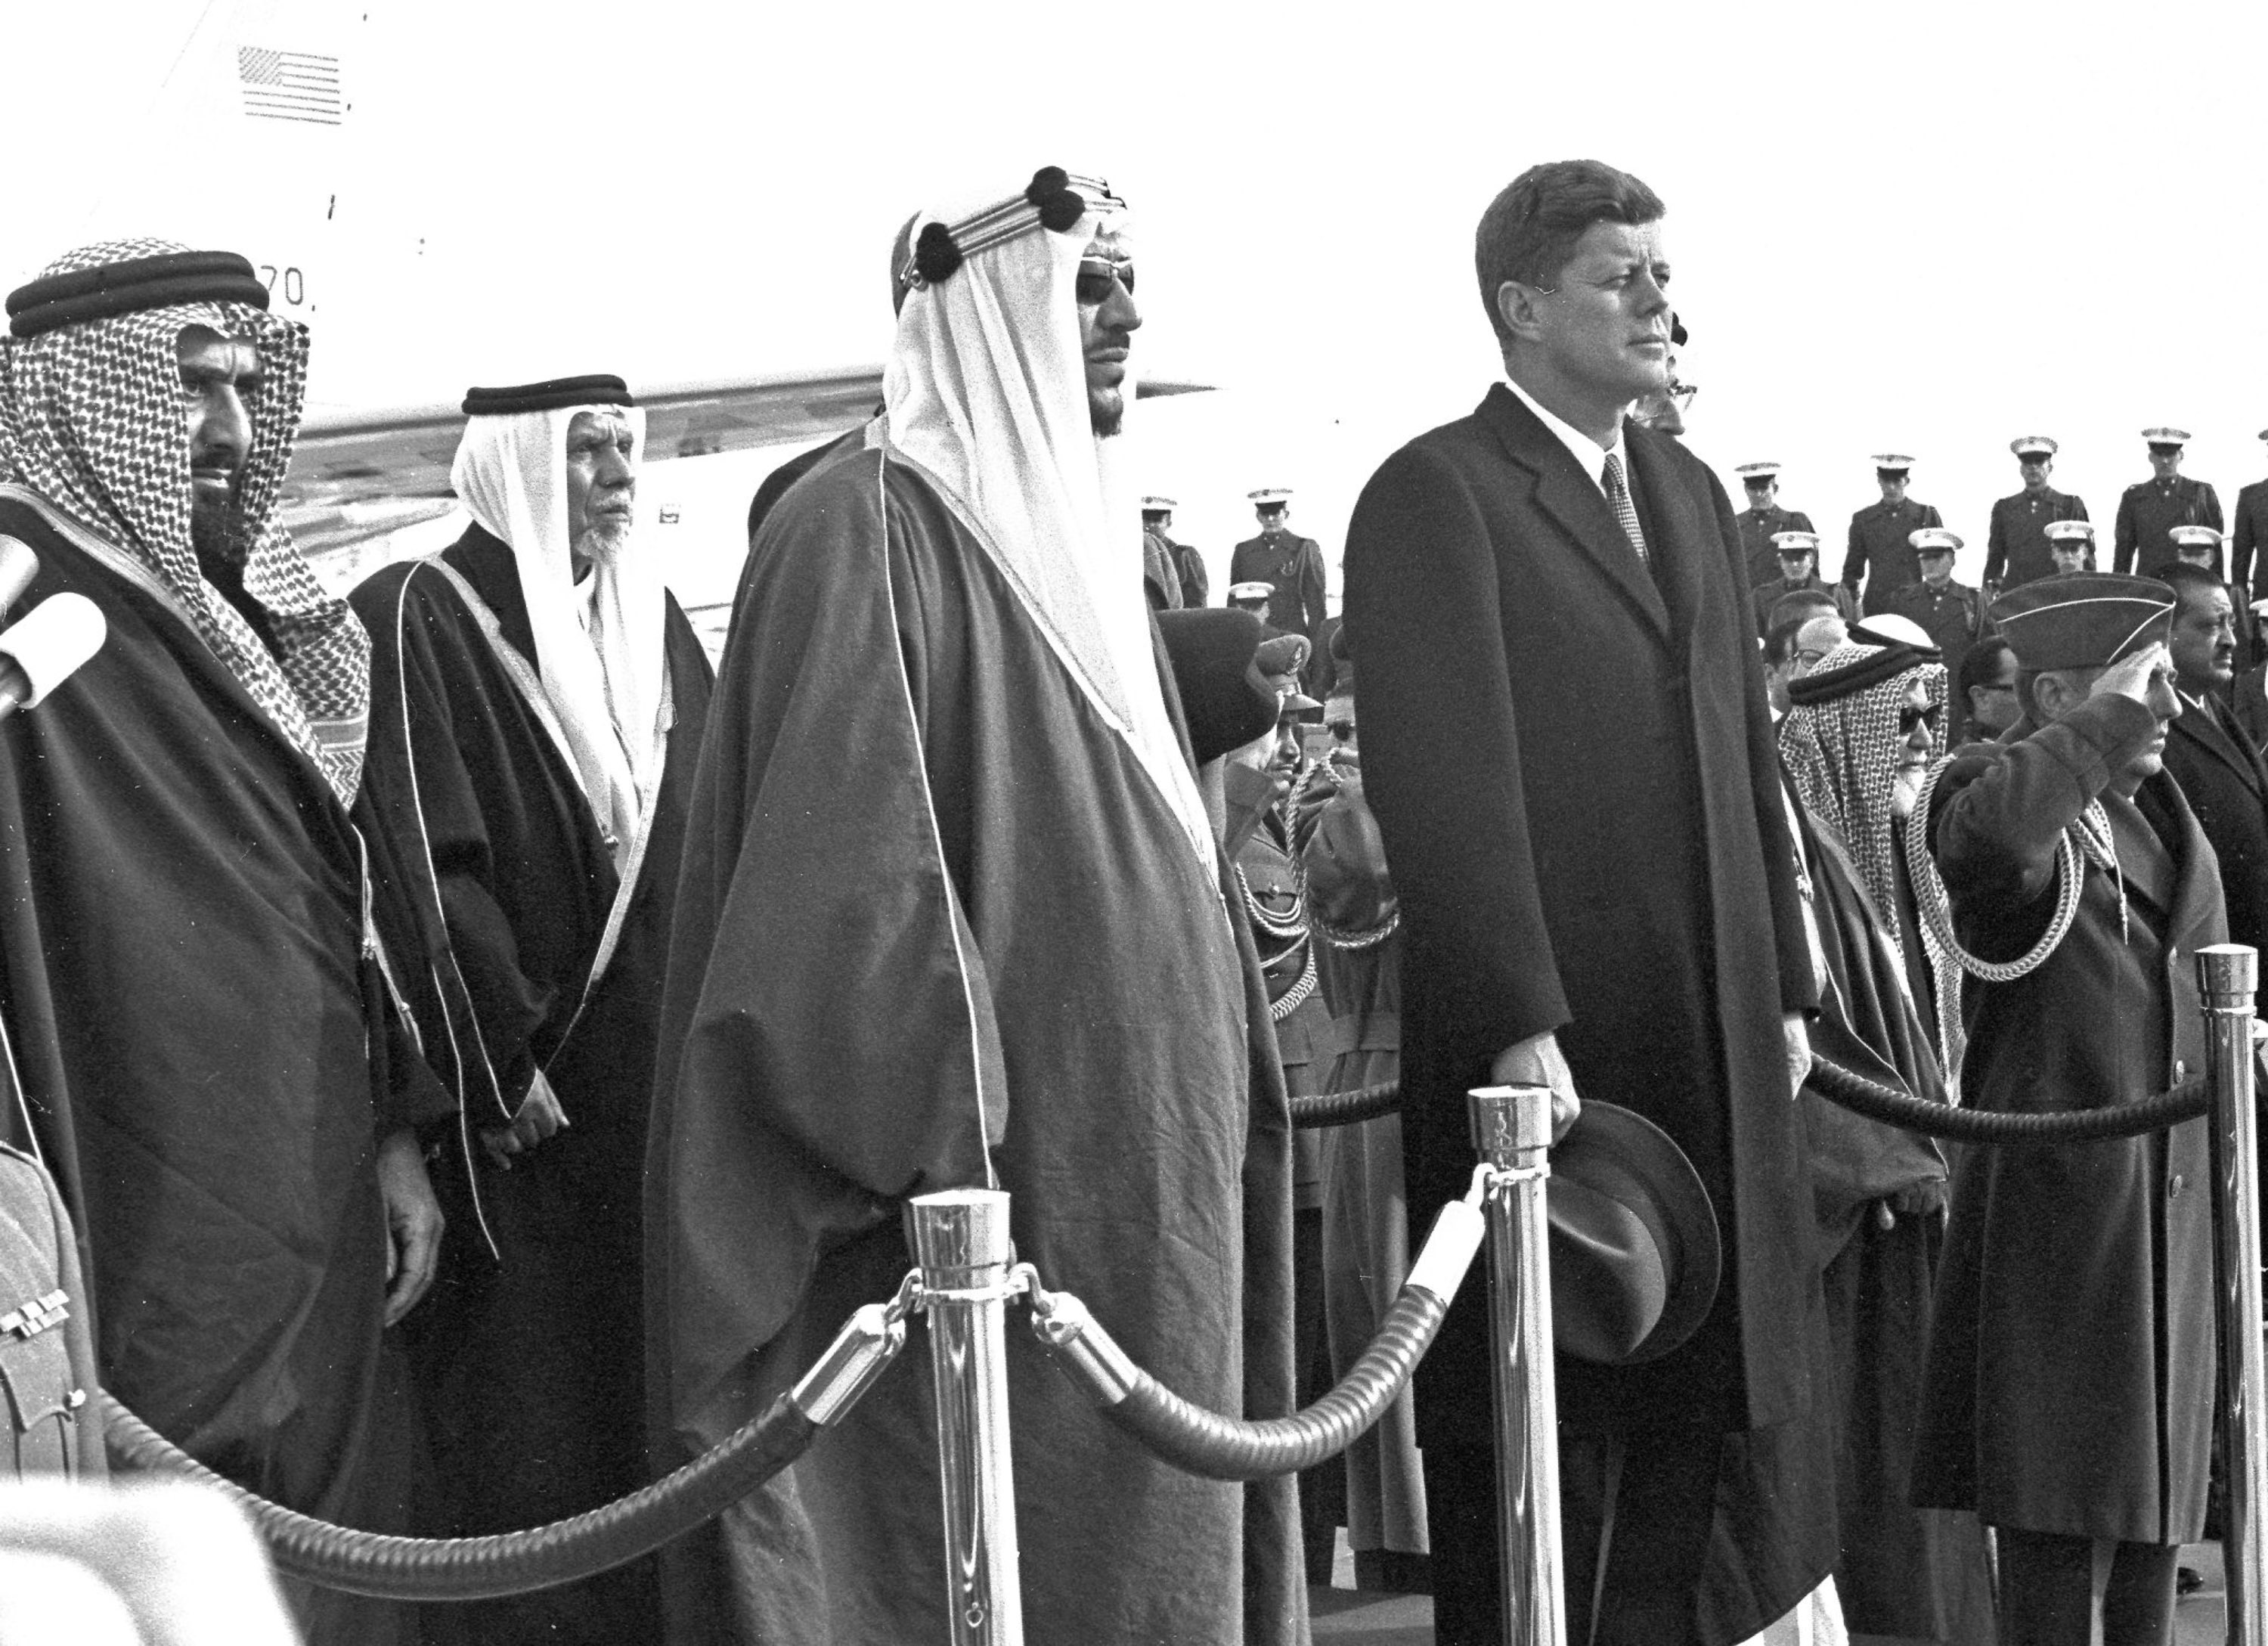  King Saud with President John F. Kennedy at the arrival ceremony with princes : Abdullah bin Jlwi , Fahad bin Saud , Khalid bin Saud , Thamir bin Saud and Jamal Al-Husseini , Jan 1962